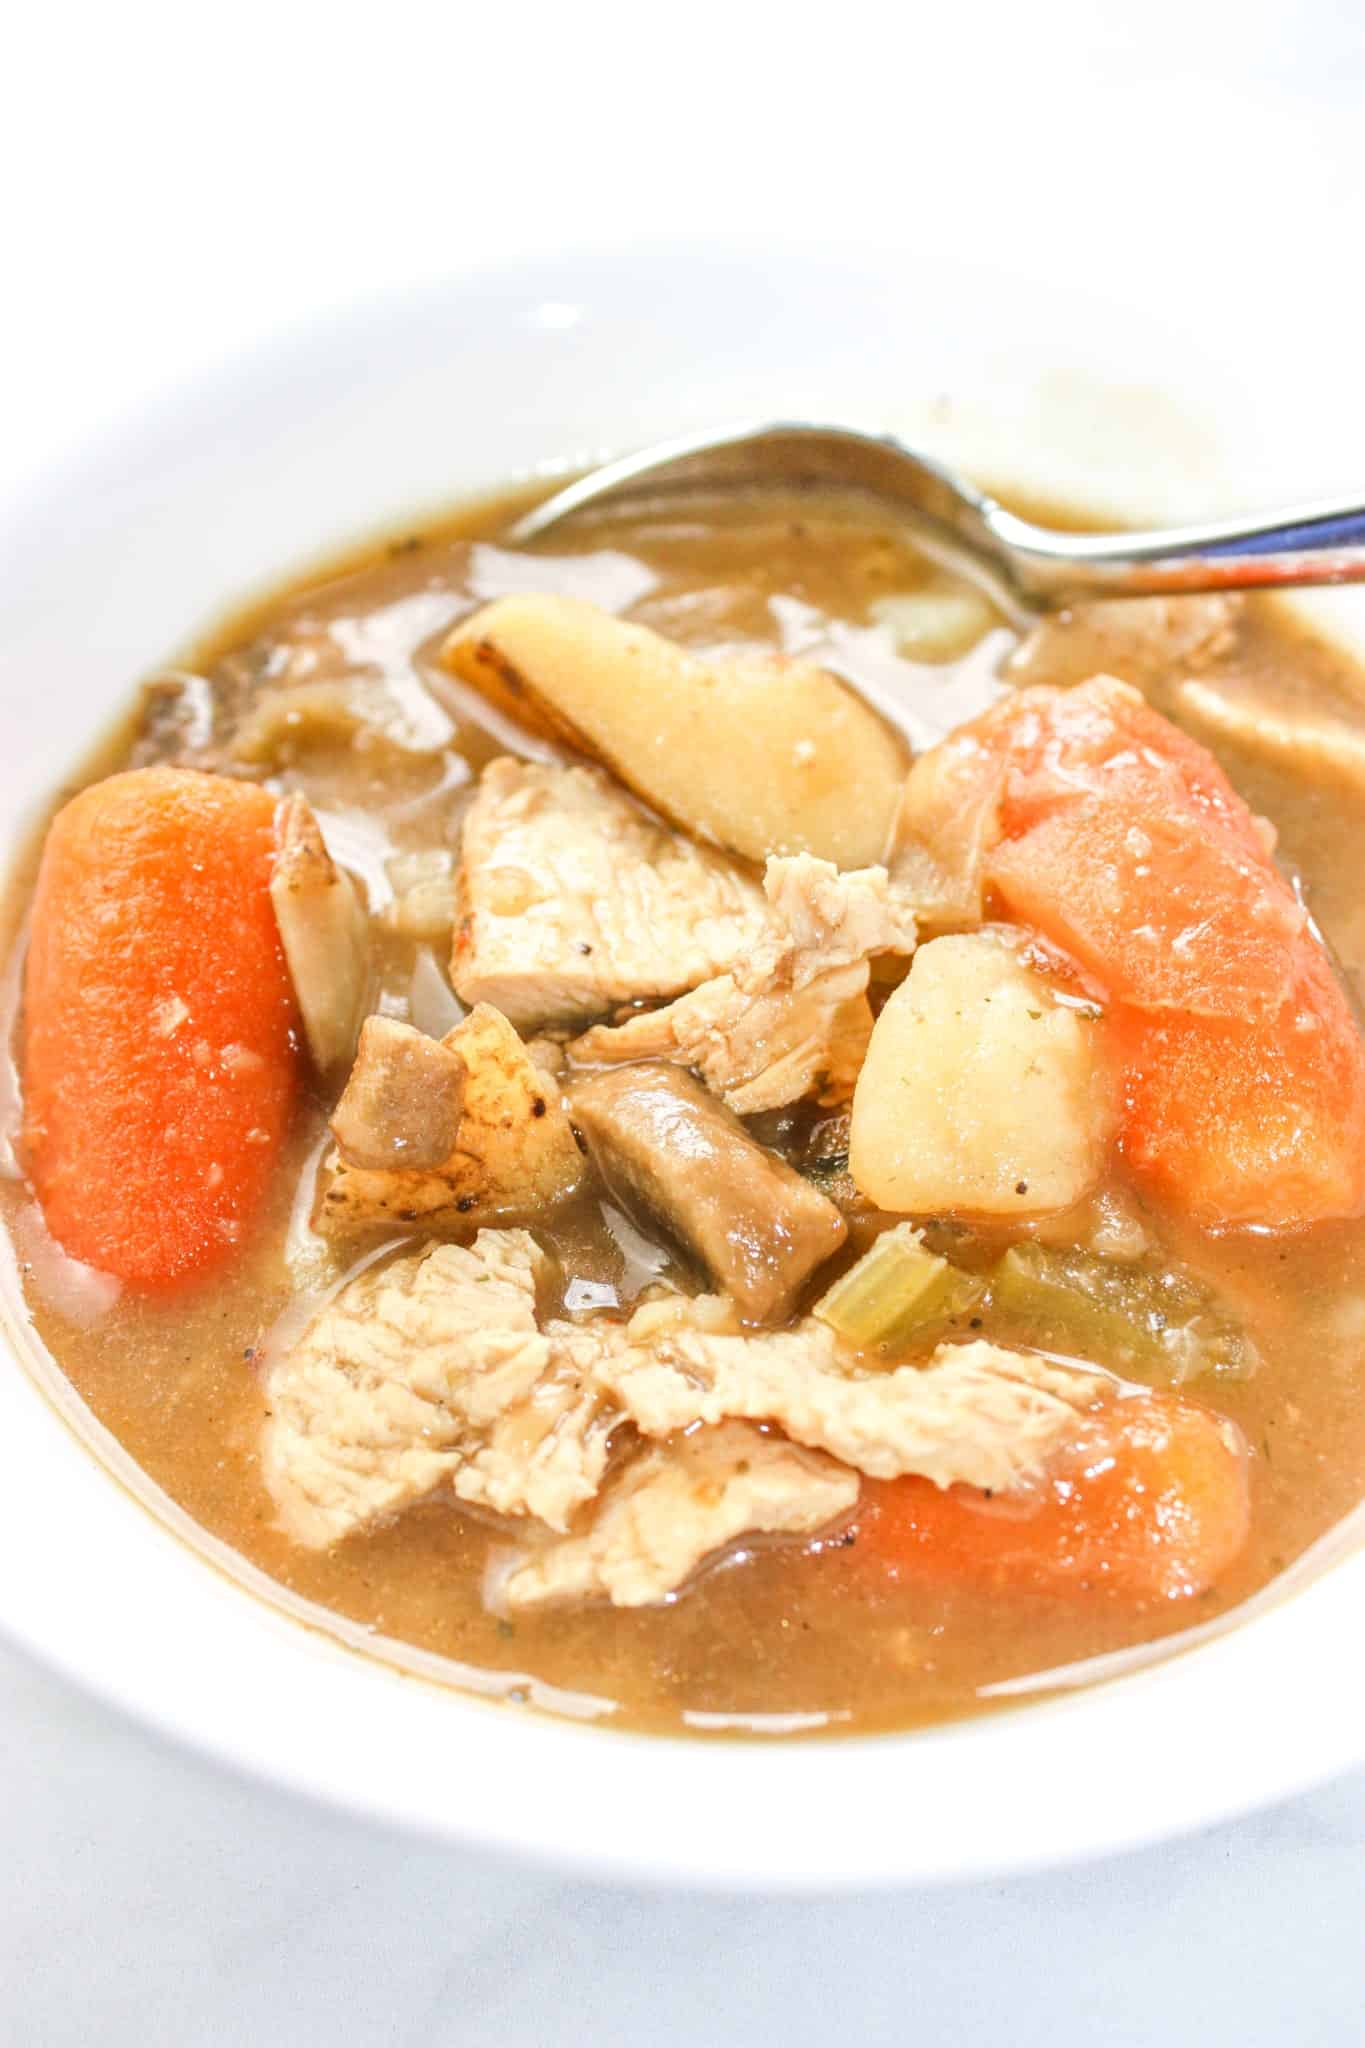 Instant Pot Wild Turkey Stew is a hearty gluten free stew recipe loaded with turkey and vegetables in a thick gravy.